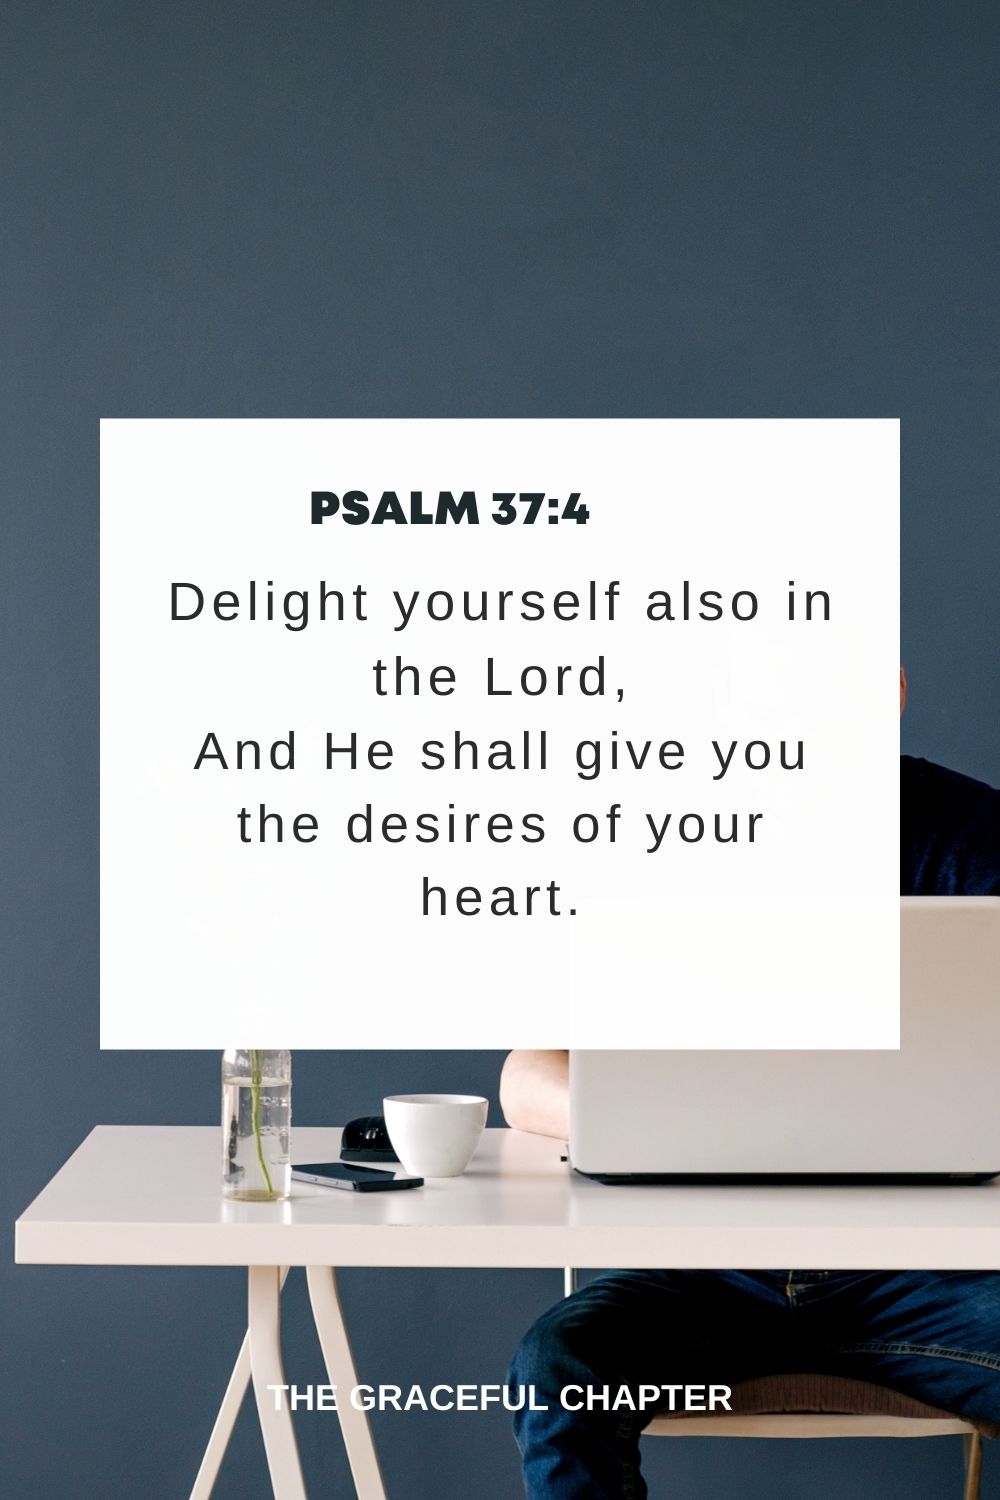 Delight yourself also in the Lord, And He shall give you the desires of your heart. Psalm 37:4